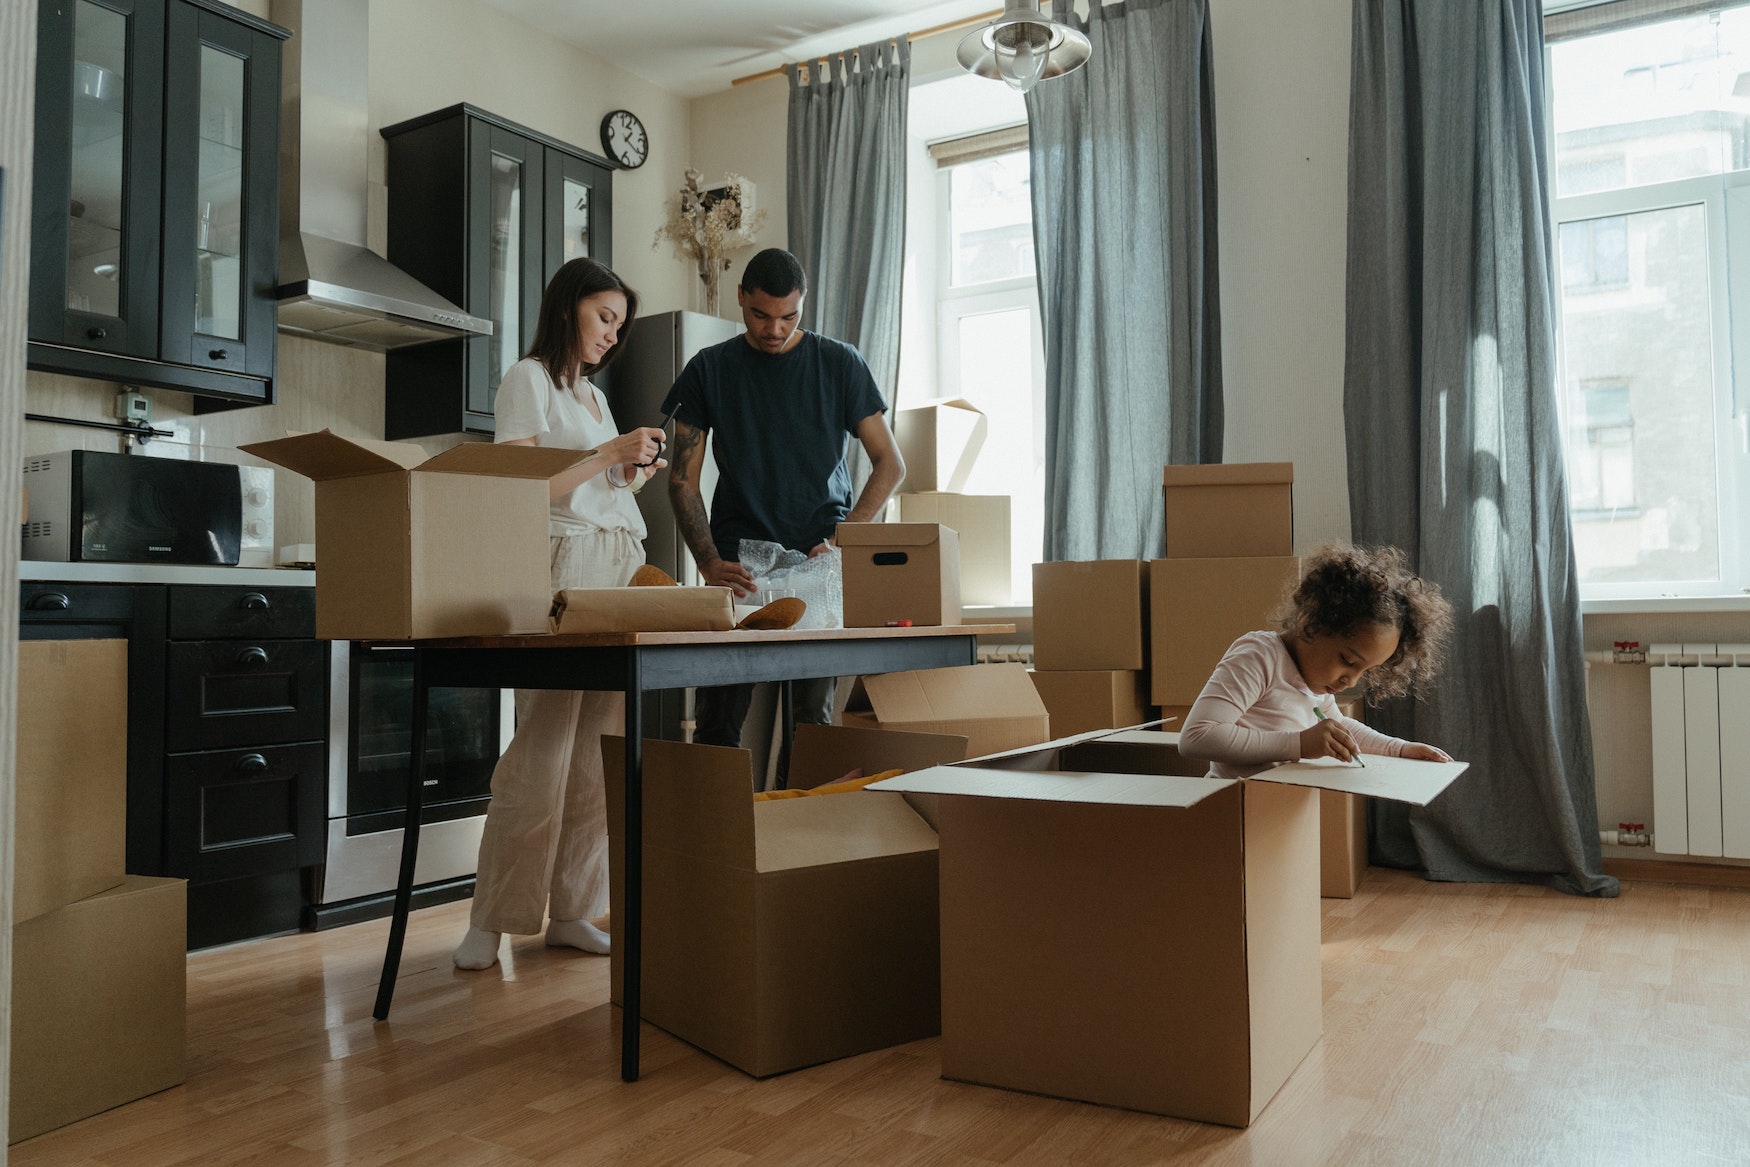 Top 10 Easily Overlooked Things When Moving Out